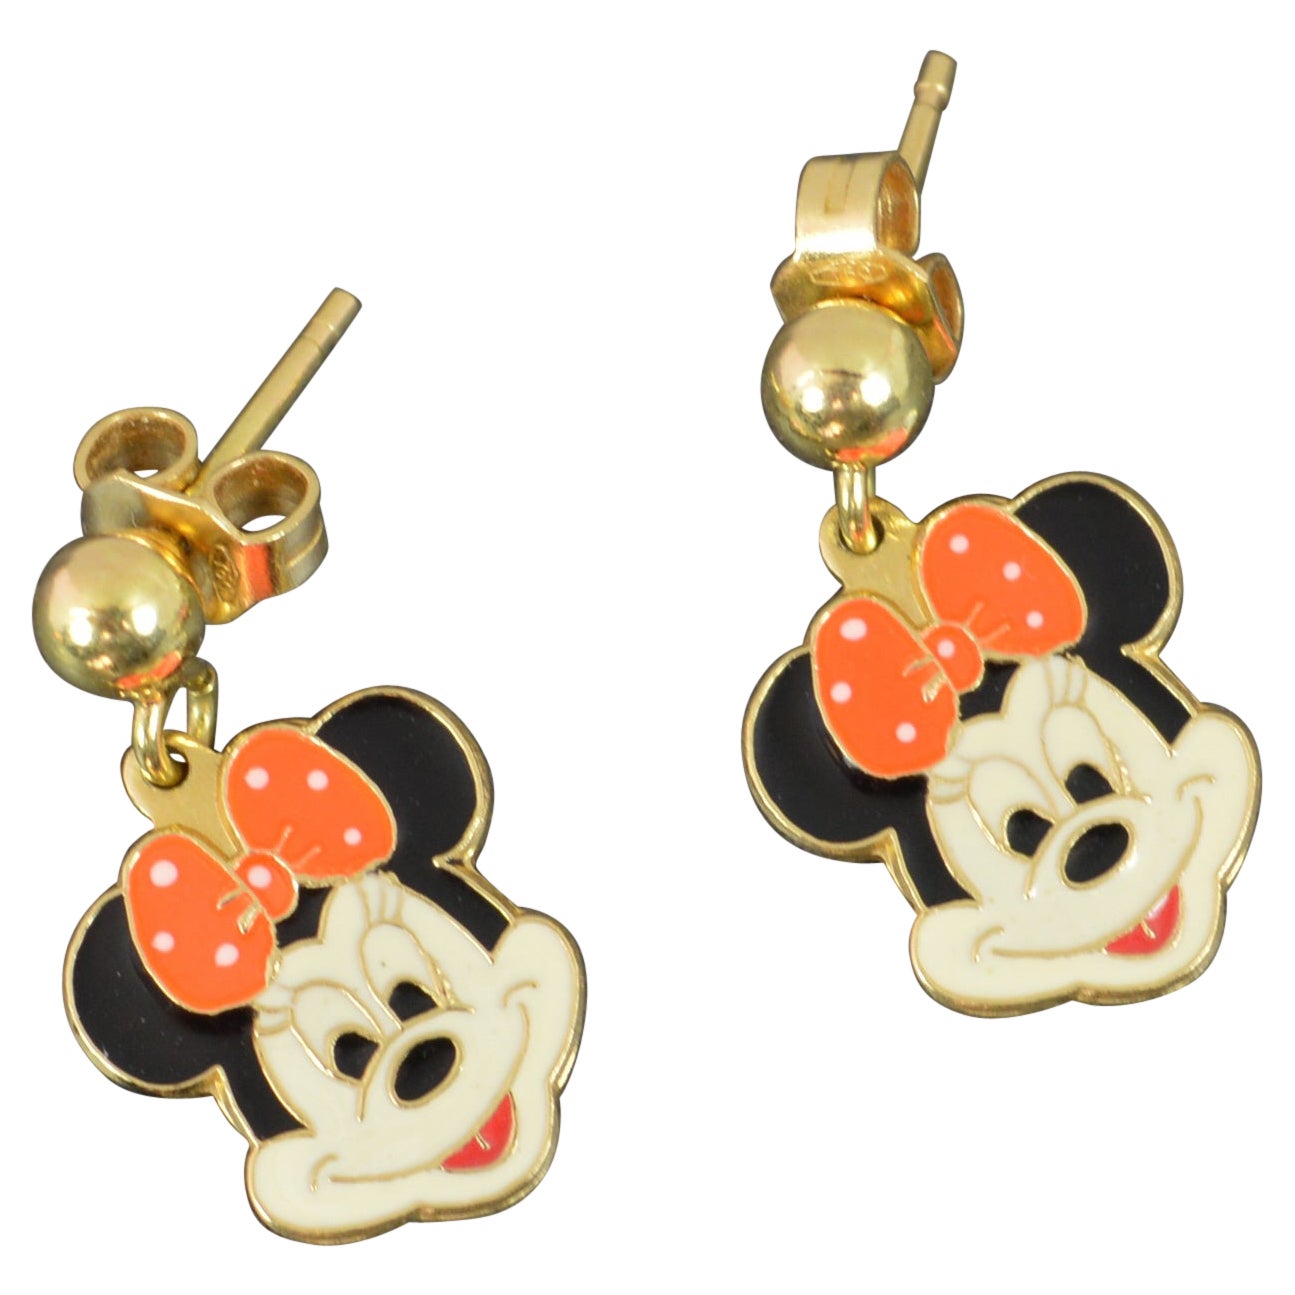 Rare Vintage 18ct Gold and Enamel Minnie Mouse Disney Earrings For Sale